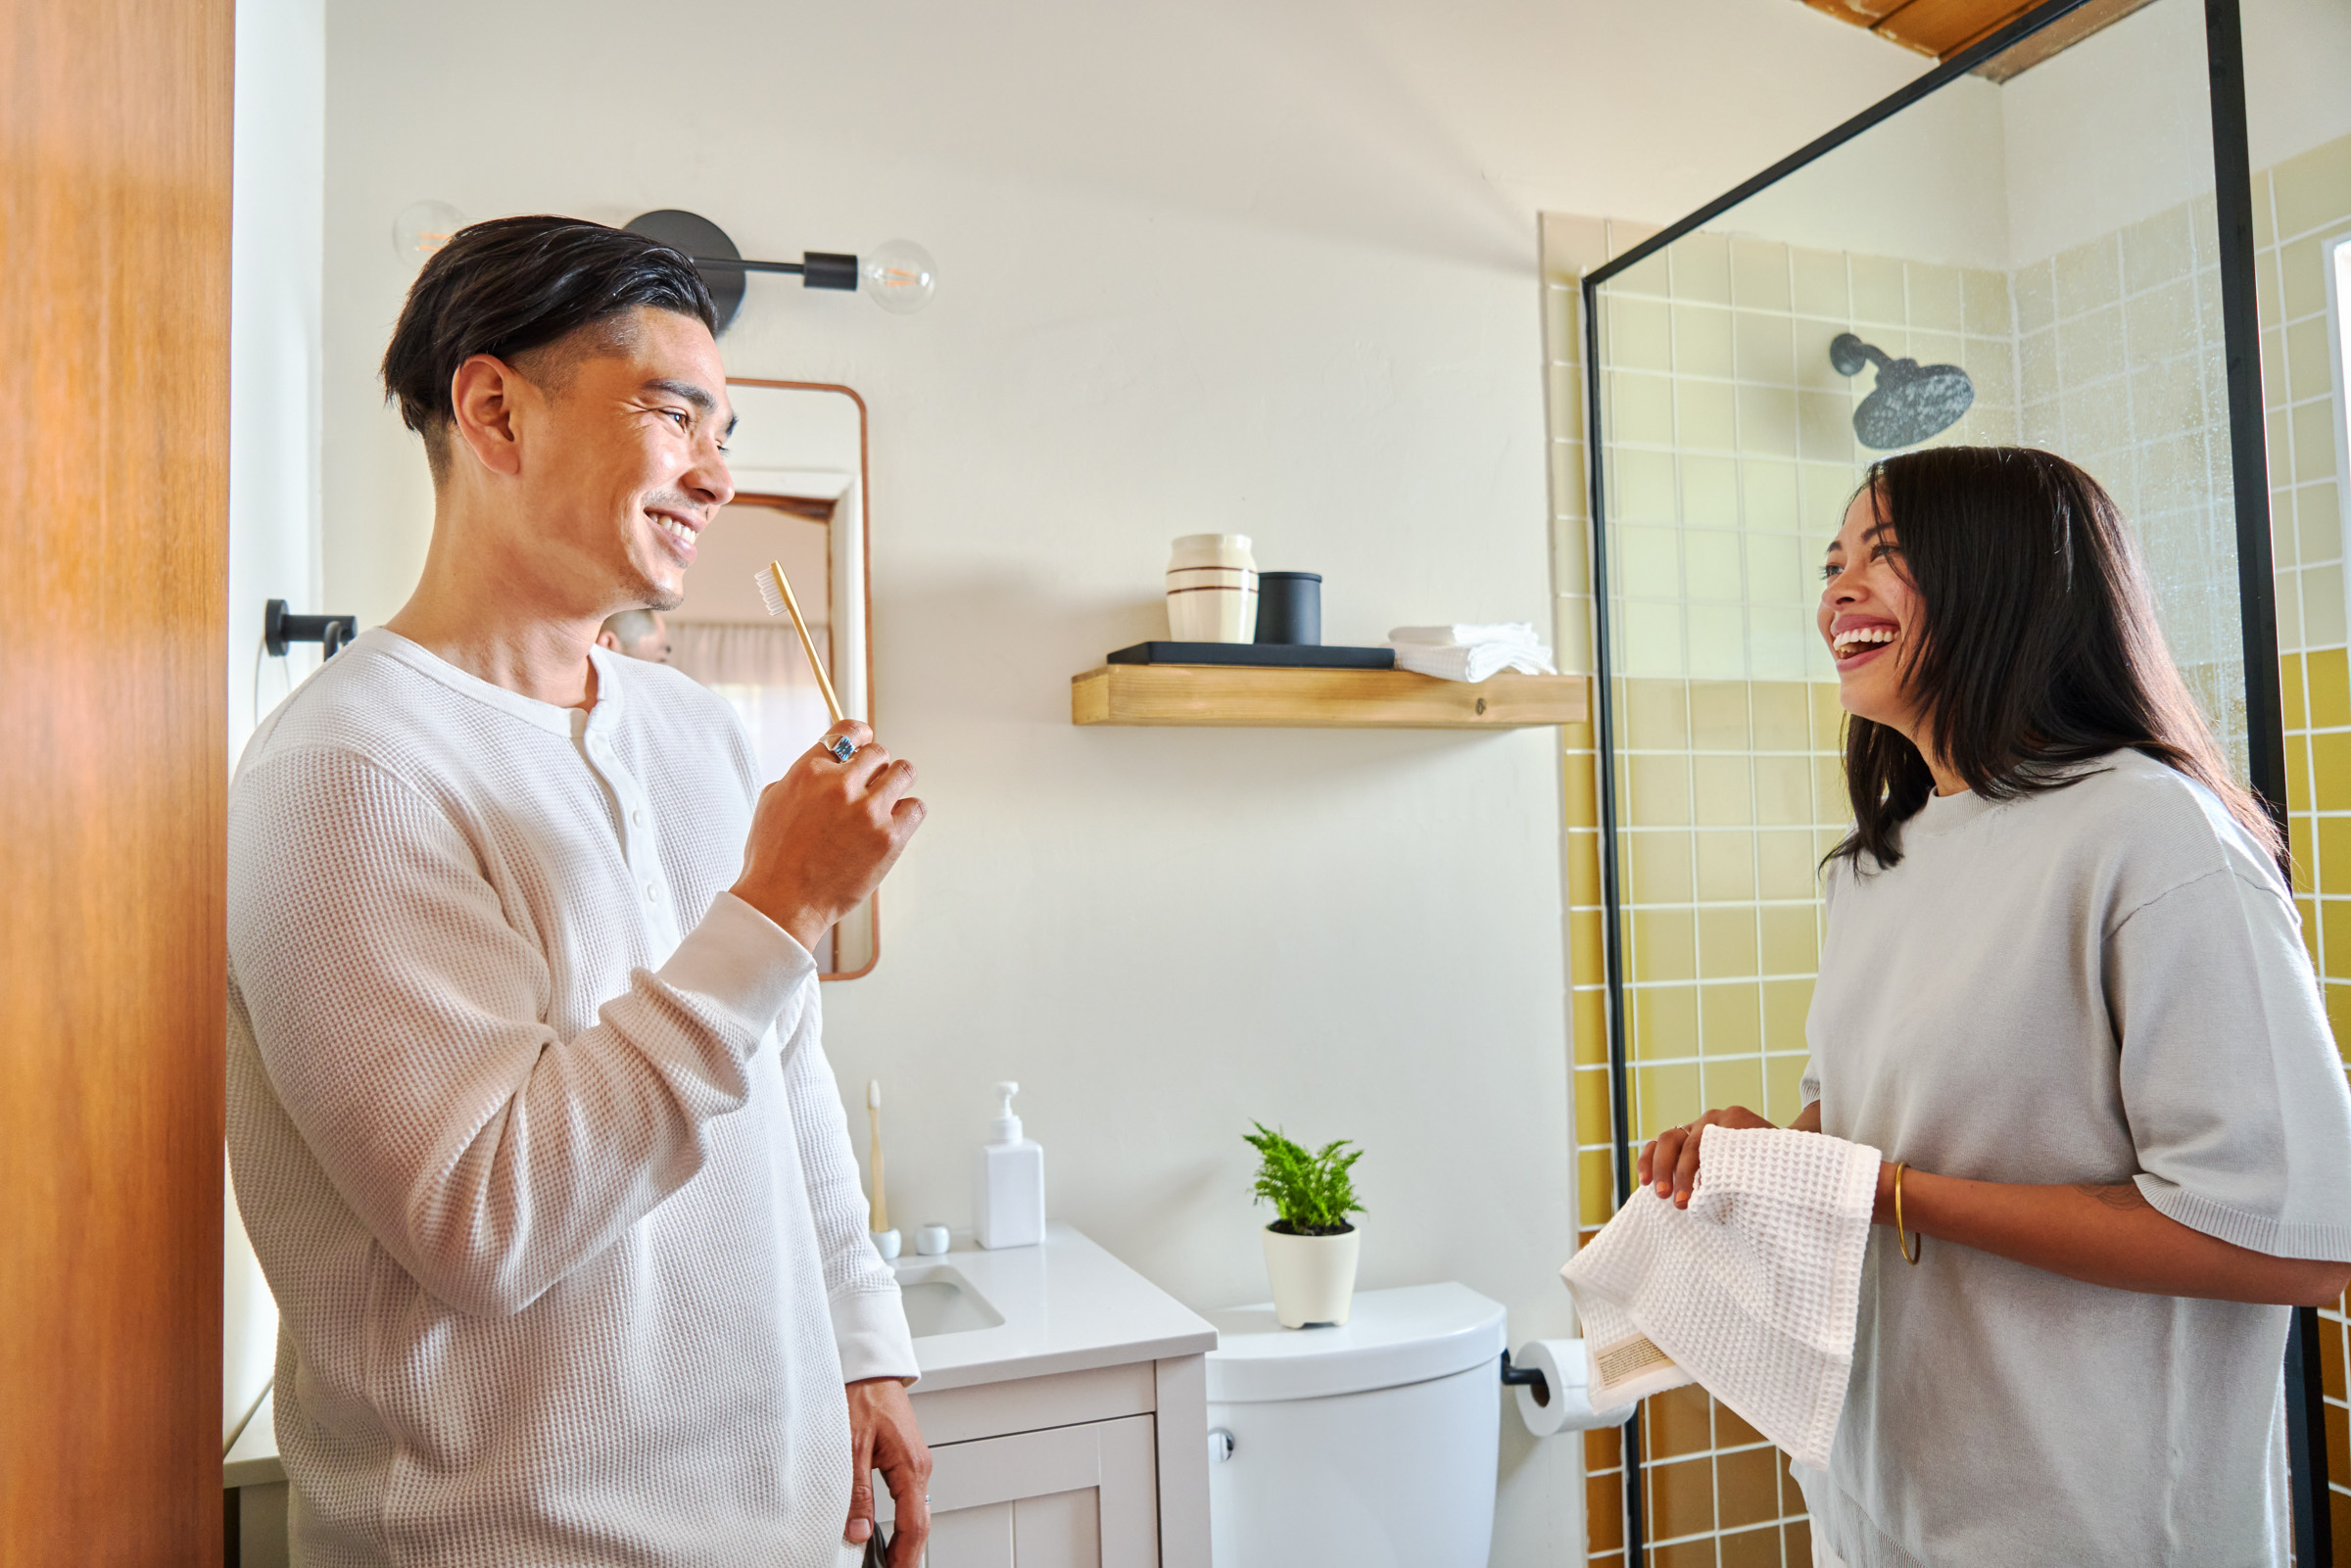 Male and female guest laugh in the bathroom of their Airbnb, holding towel linens featured in the essential kit.